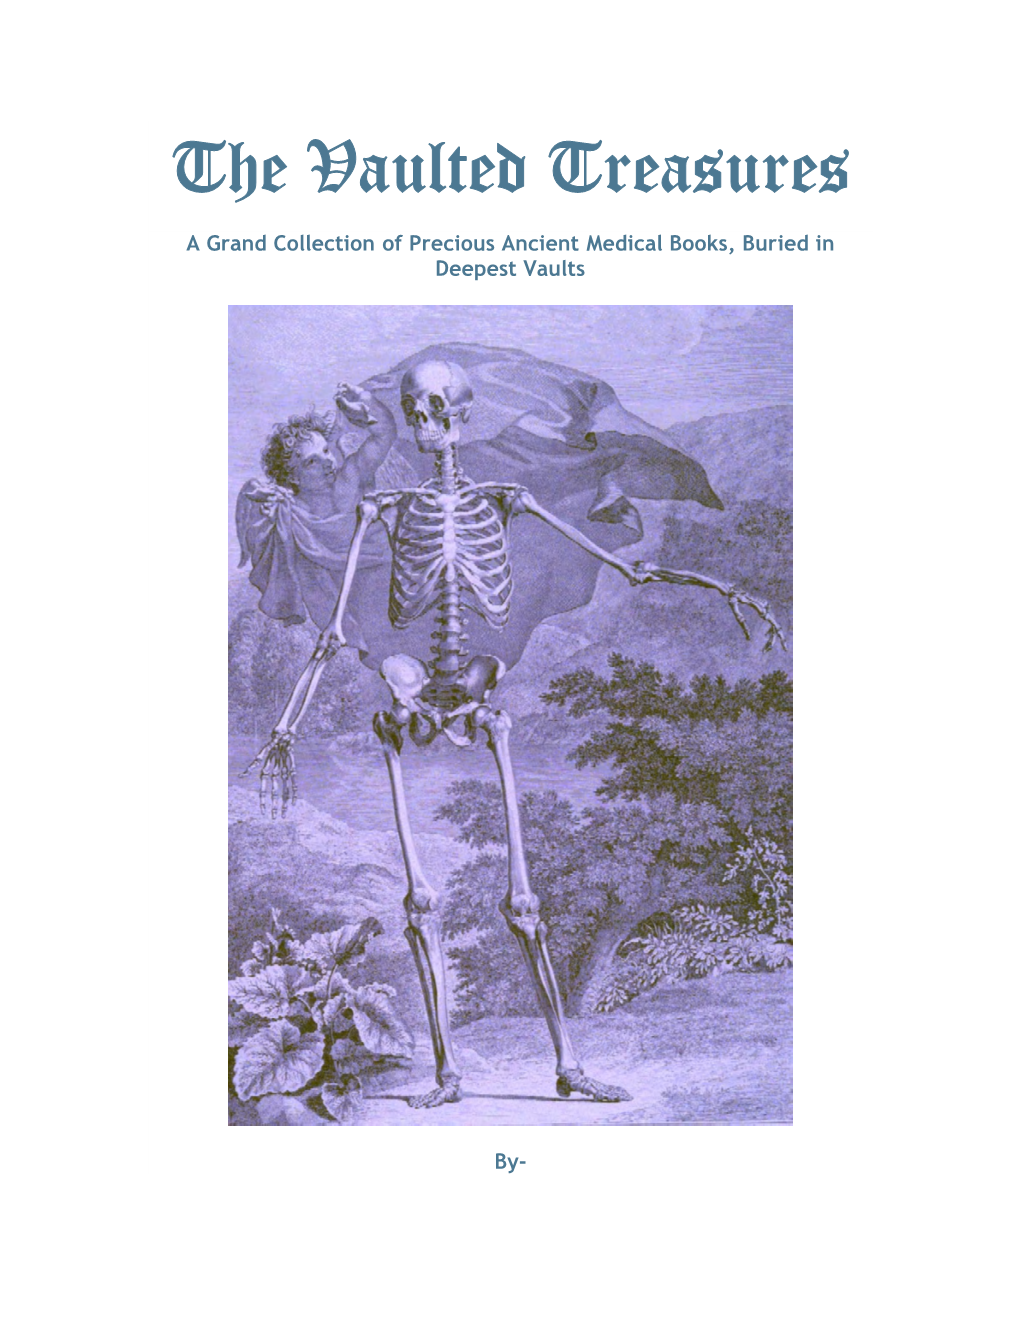 The Vaulted Treasures